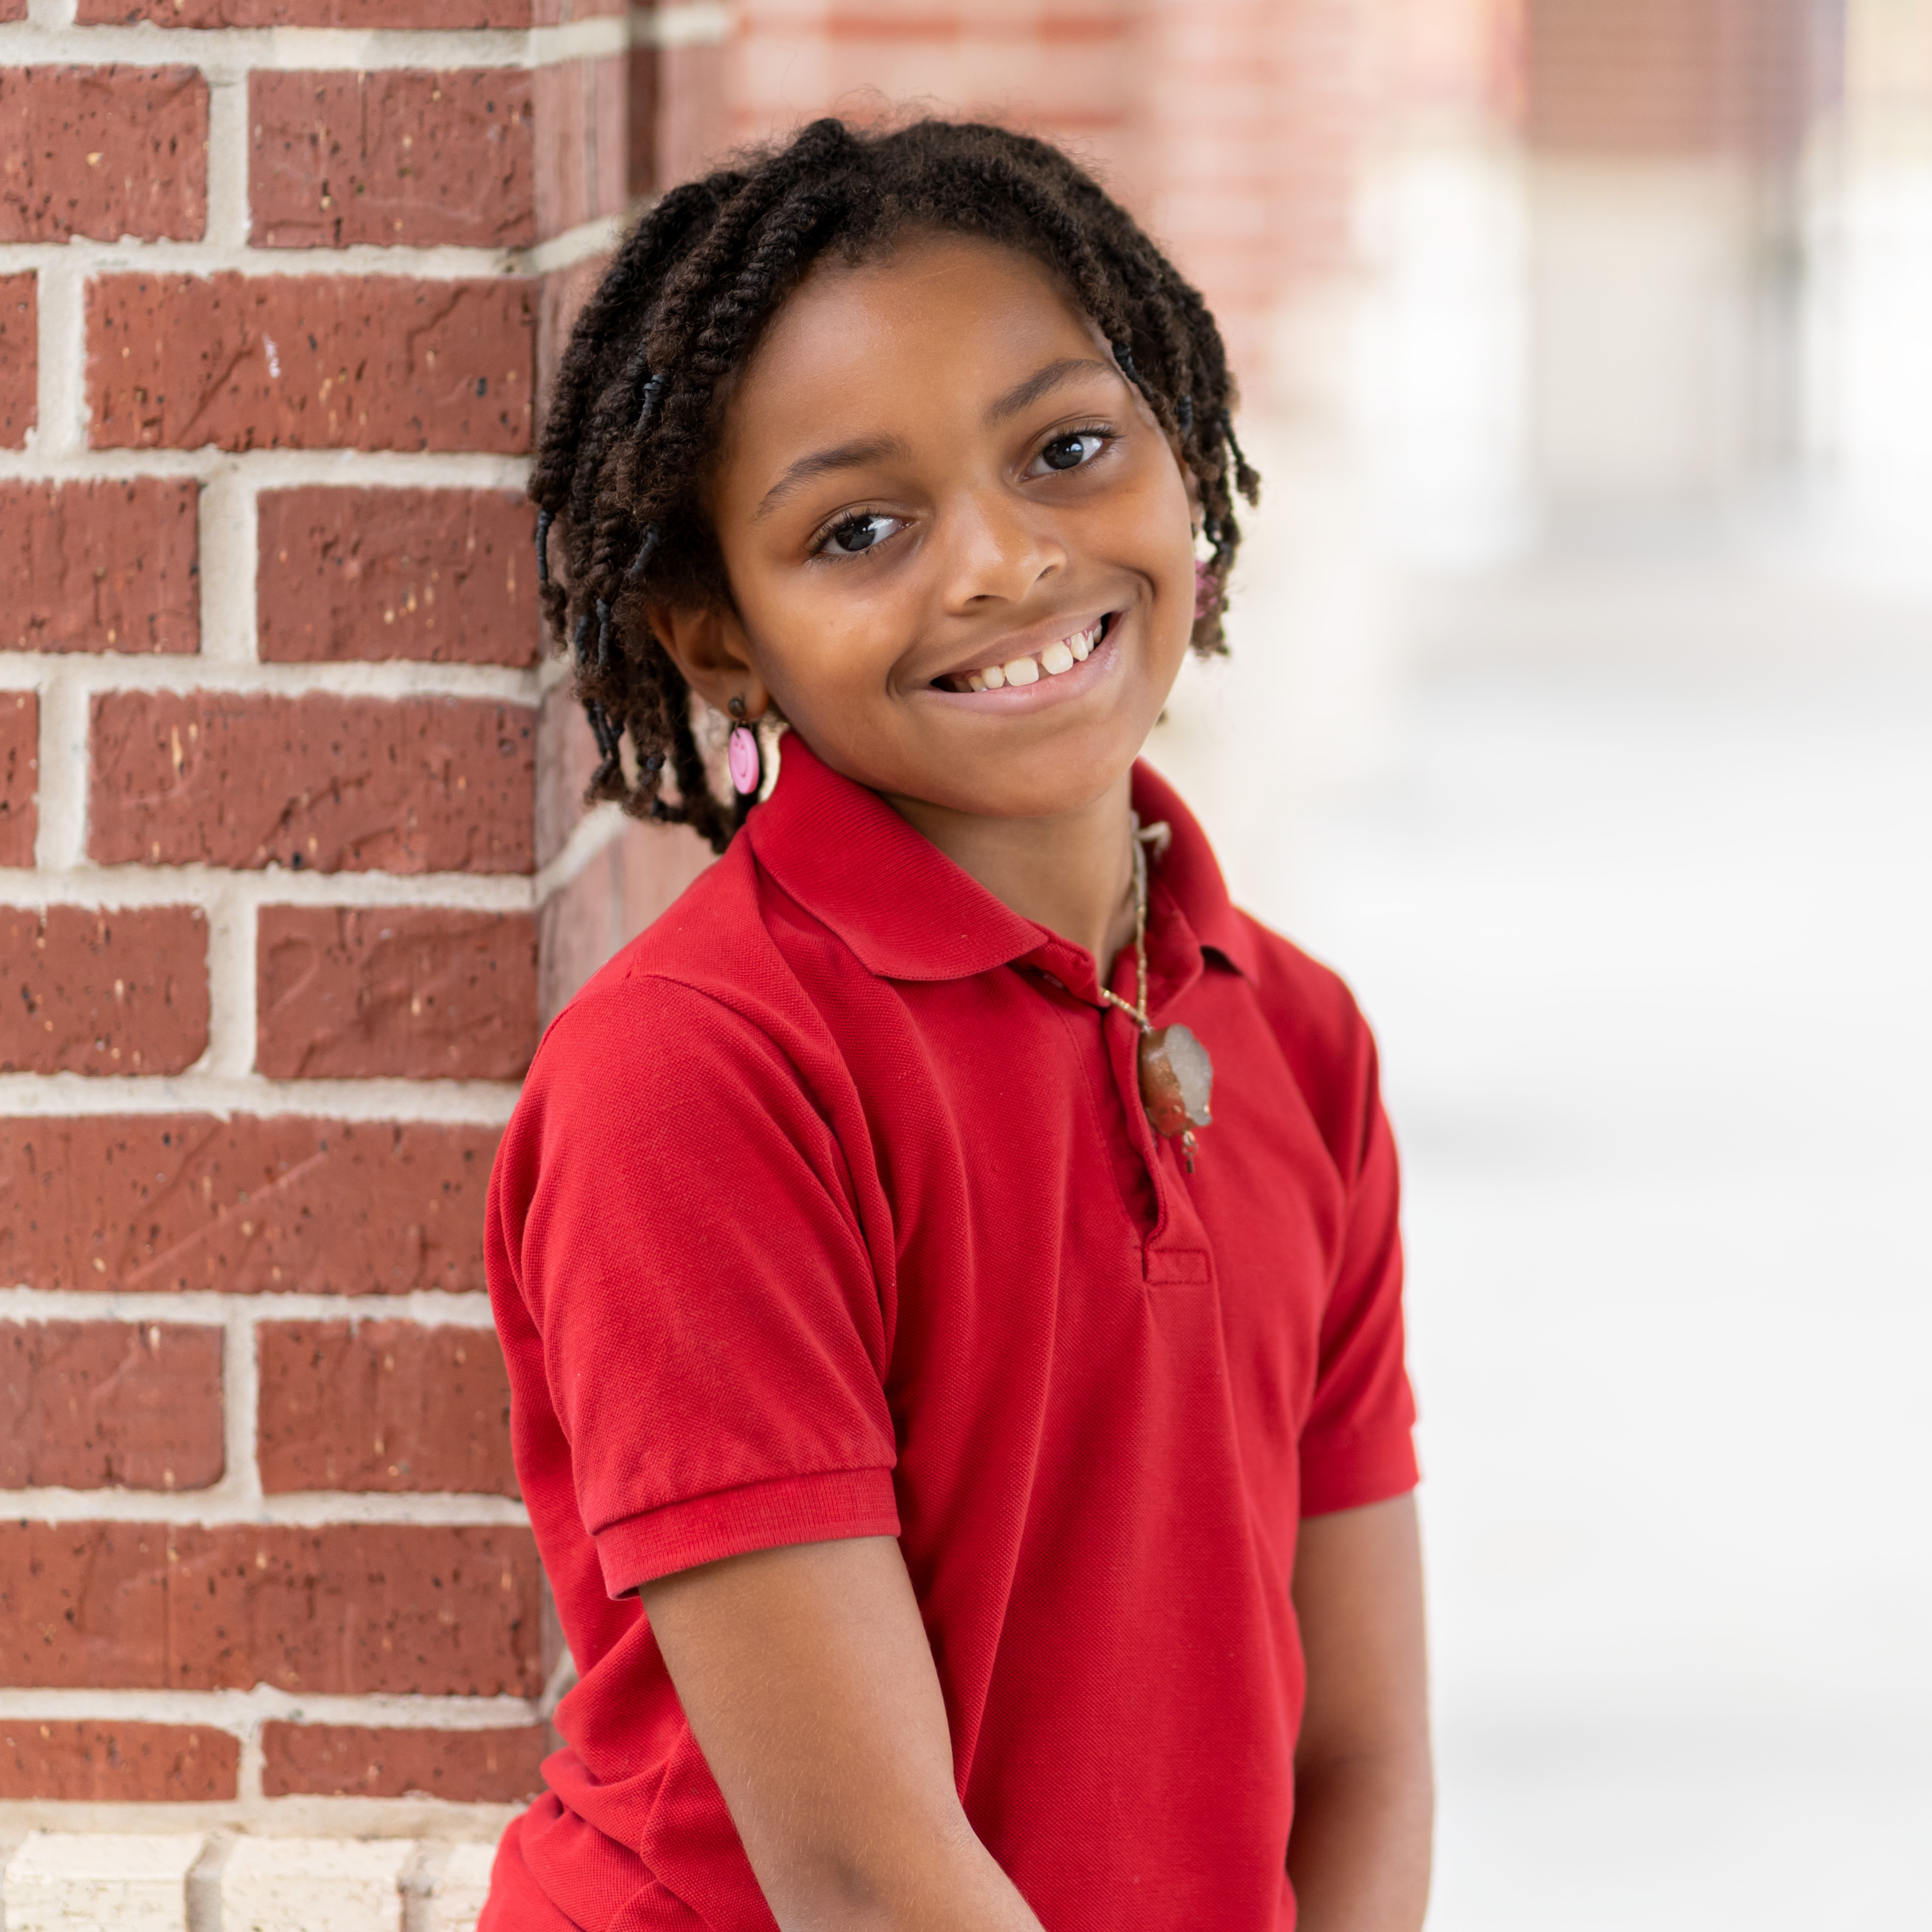 elementary age African-American girl wearing a red polo shirt leaning against a brick wall